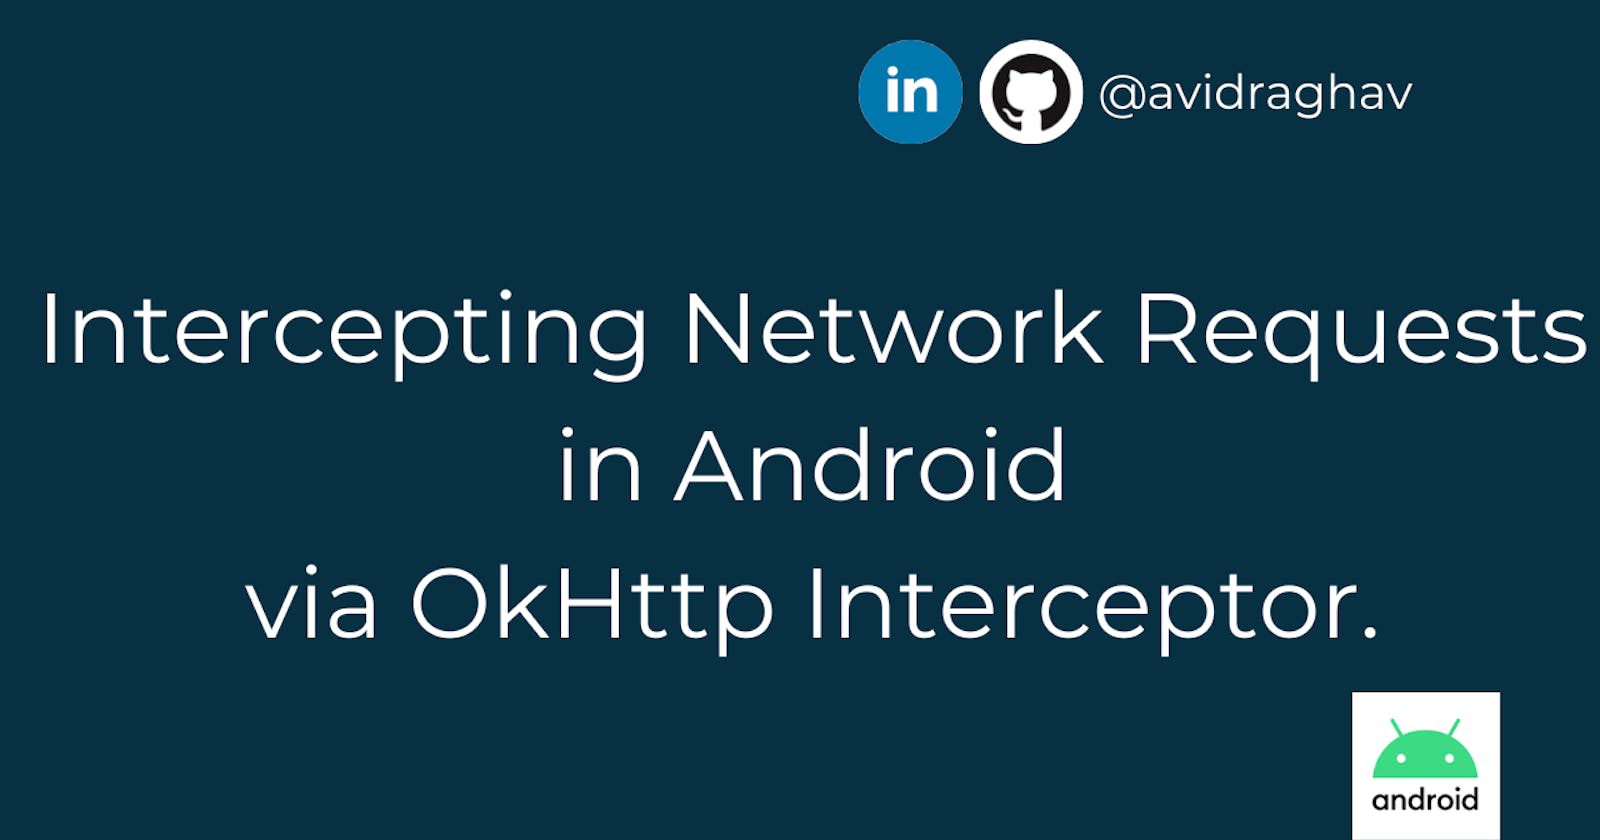 Intercepting Network Requests in Android
via OkHttp Interceptor.